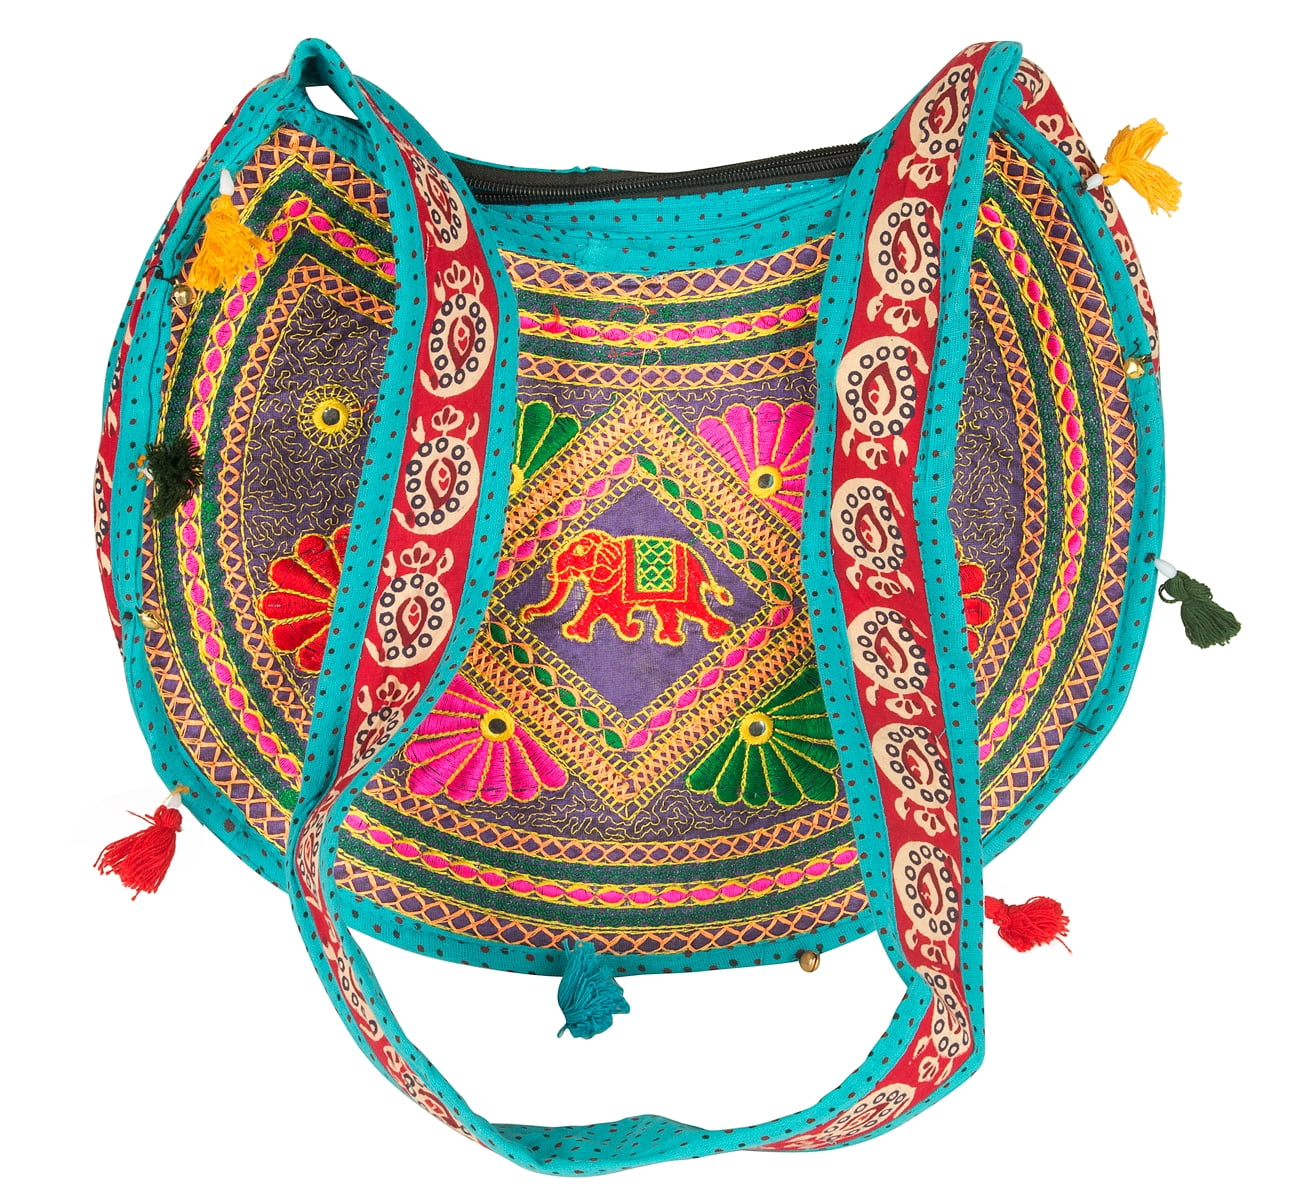 Awesome vintage hippie patchwork embroidered crossbody bag amazing handmade tribal bohemian purse indian native tribe ethnic gorgeous sling